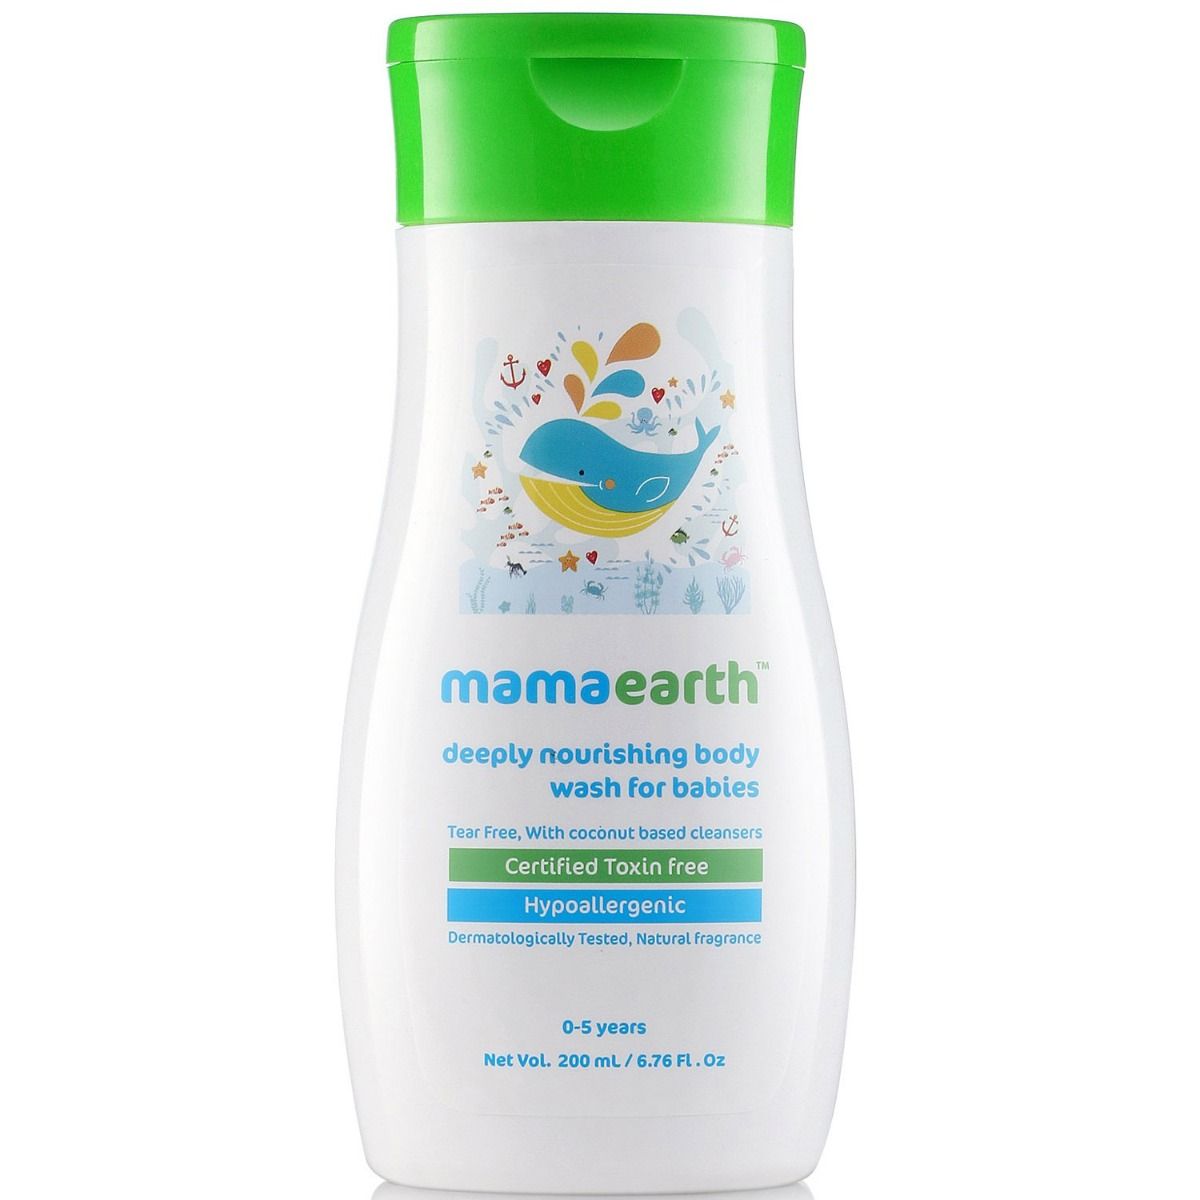 Buy Mamaearth Deeply Nourishing Body Wash For Babies, 0 to 5 Years, 200 ml Online